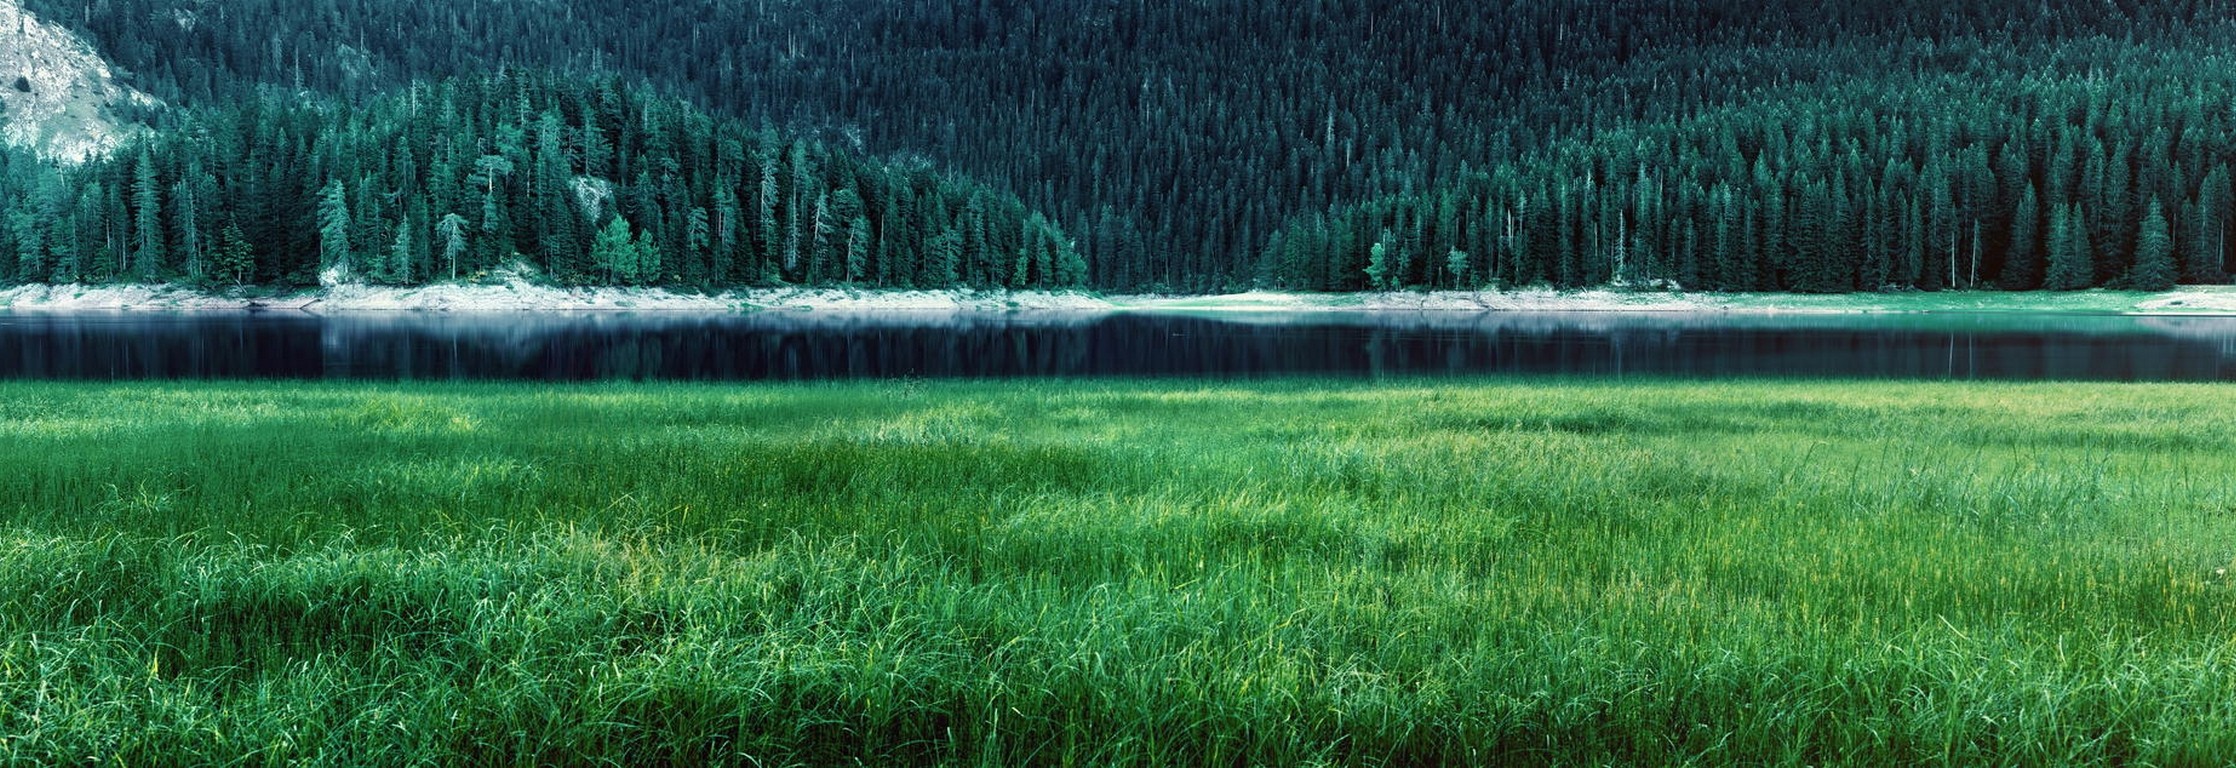 General 2236x768 green lake mountains forest grass spring water panorama trees nature landscape